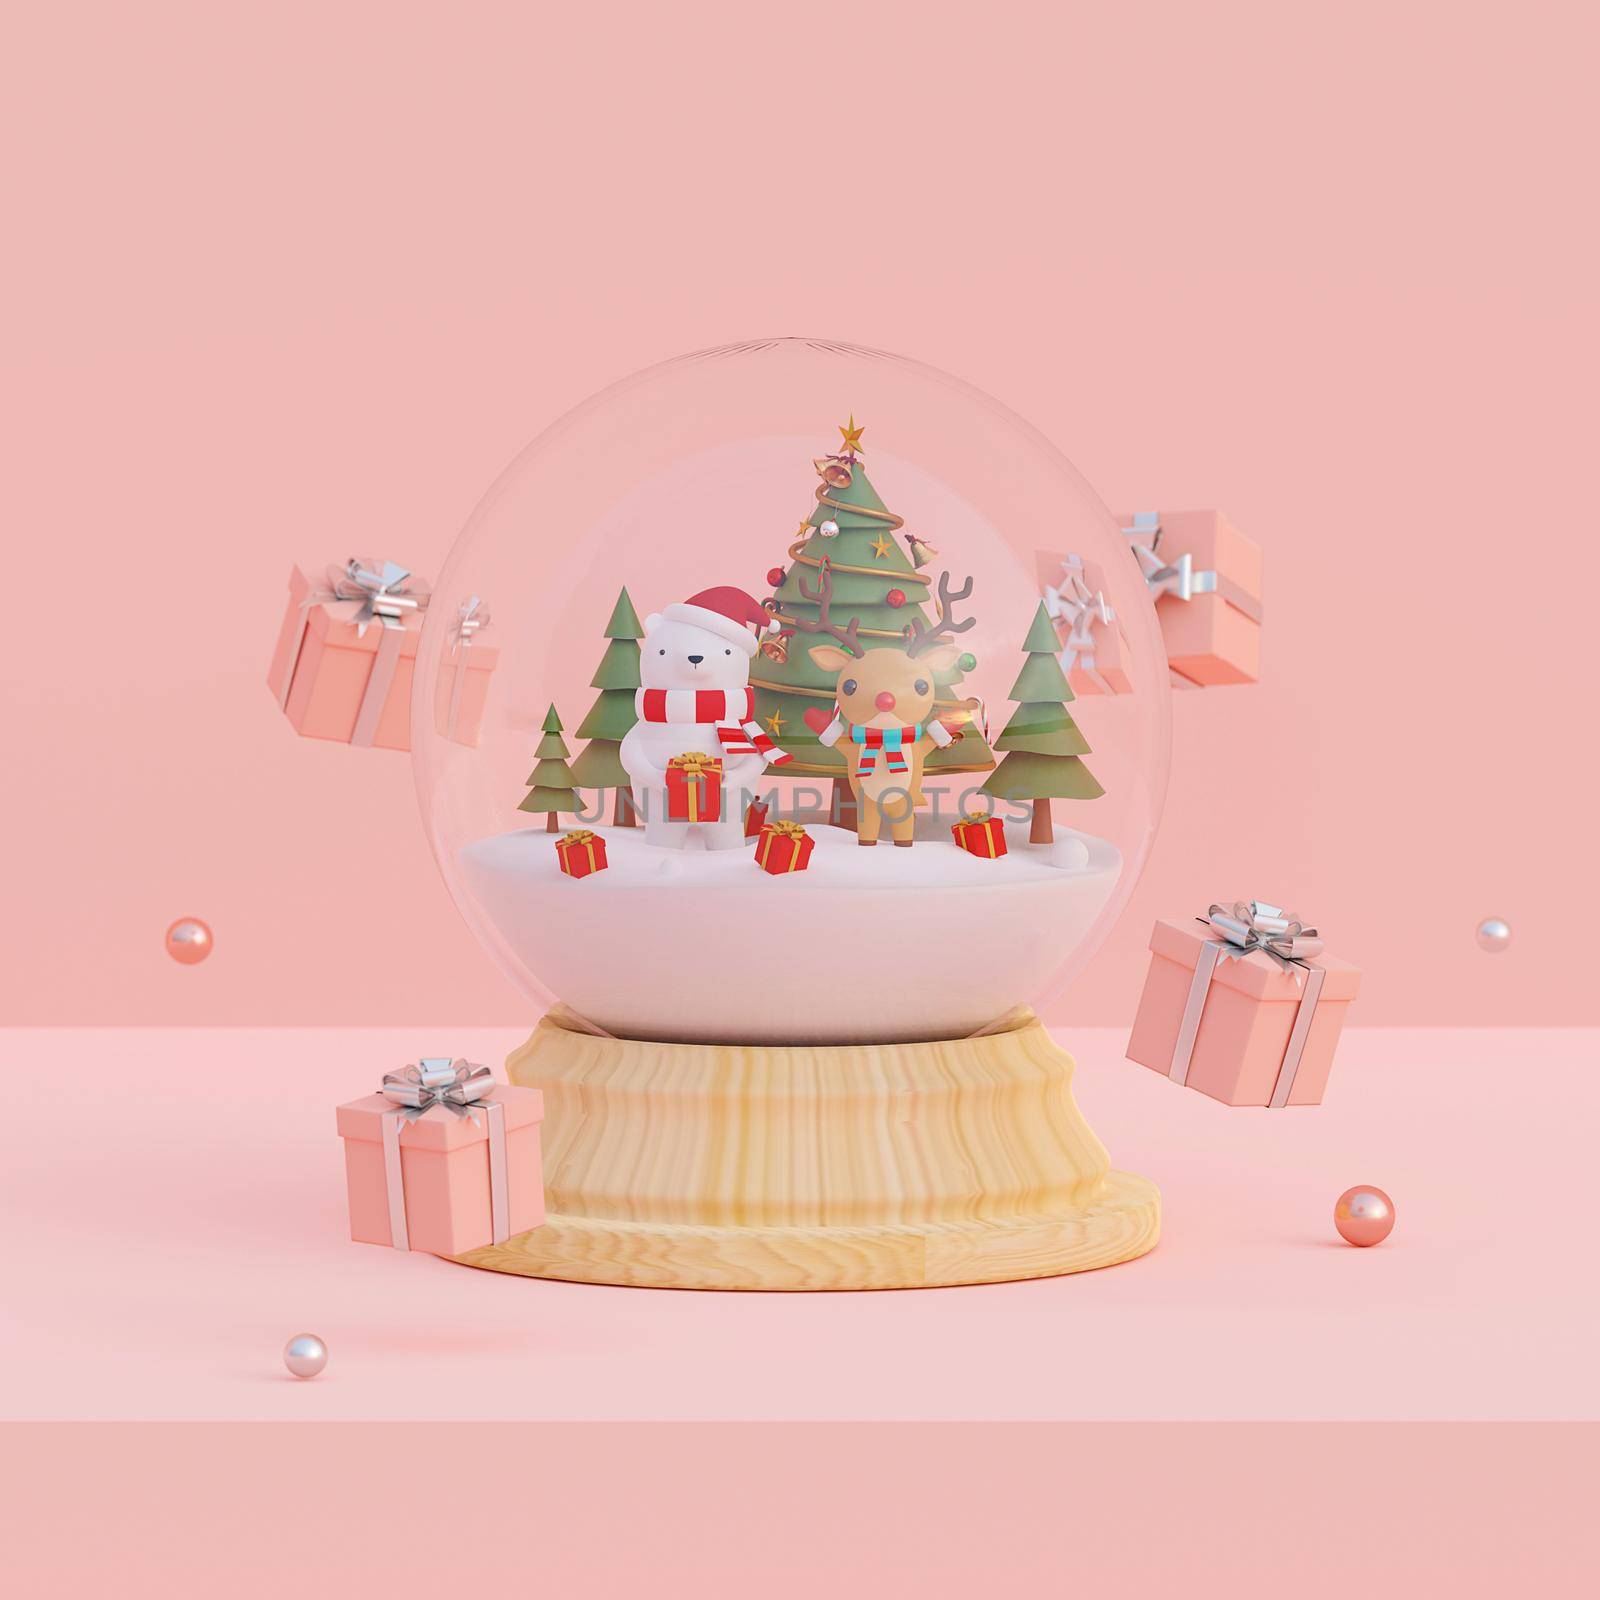 Merry Christmas and Happy New Year, Scene of Christmas gifts and bear, Reindeer with Christmas tree in a snow globe, 3d rendering by nutzchotwarut